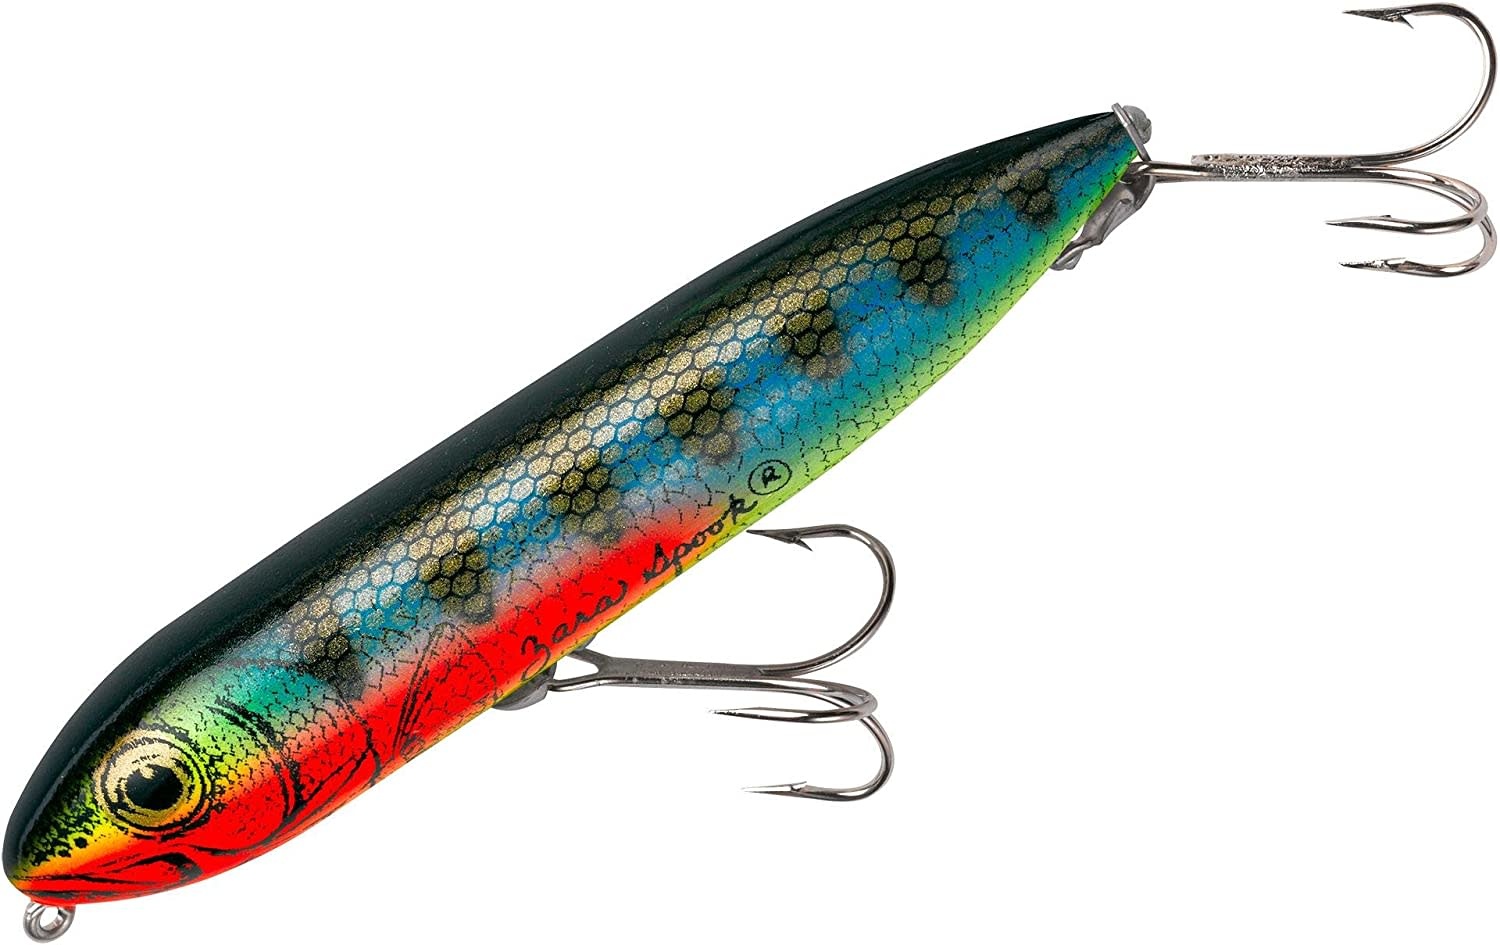 Luhr Jensen Super Duper Magnum - Great Lakes Outfitters